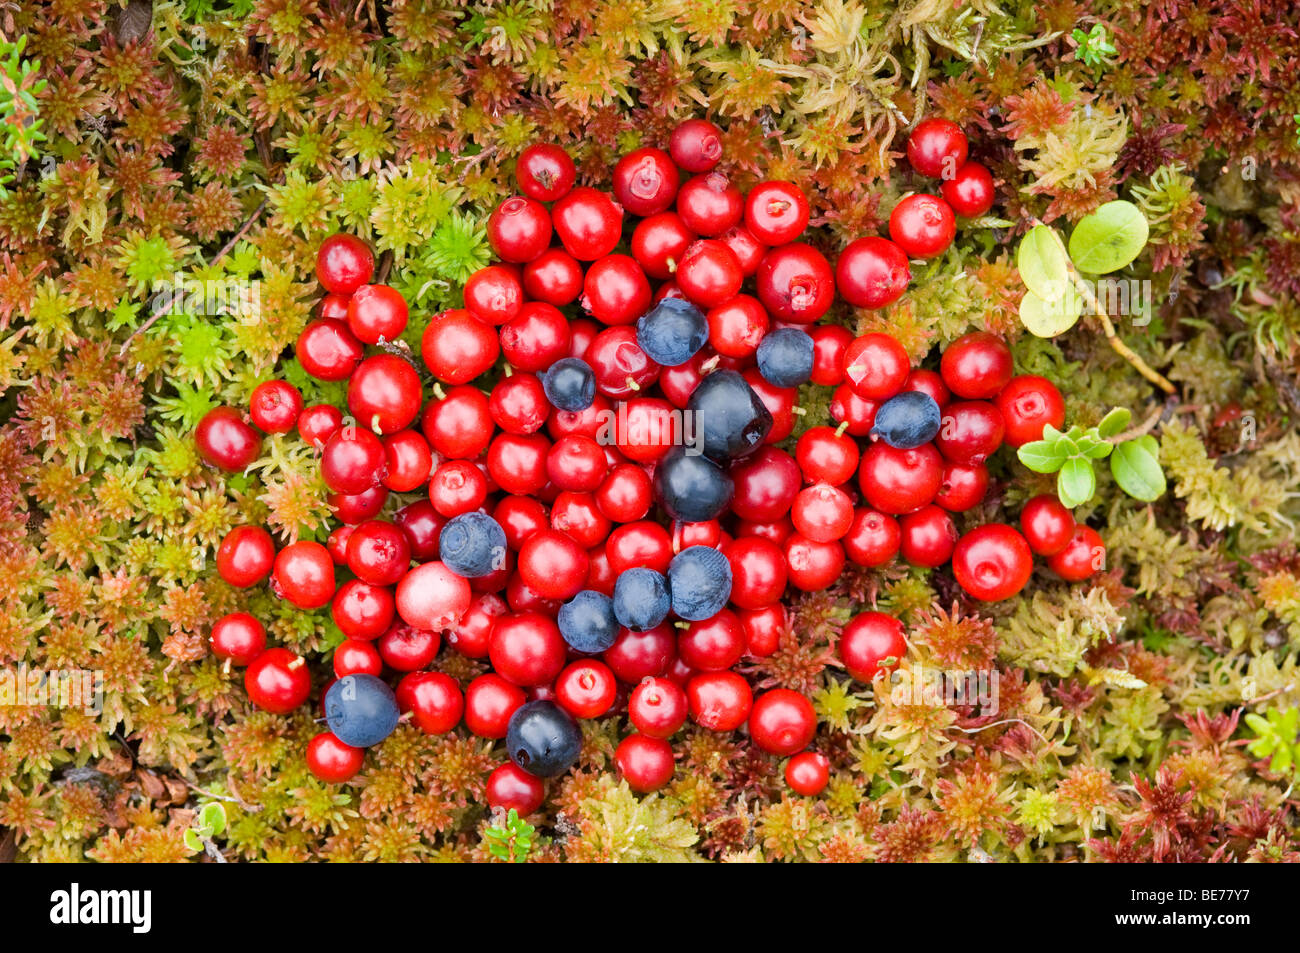 Wild food. Red berries/ fruits of Cowberry, or Lingonberry, Vaccinium vitis-idaea, and black berries of Bilberry, V. myrtillus Stock Photo